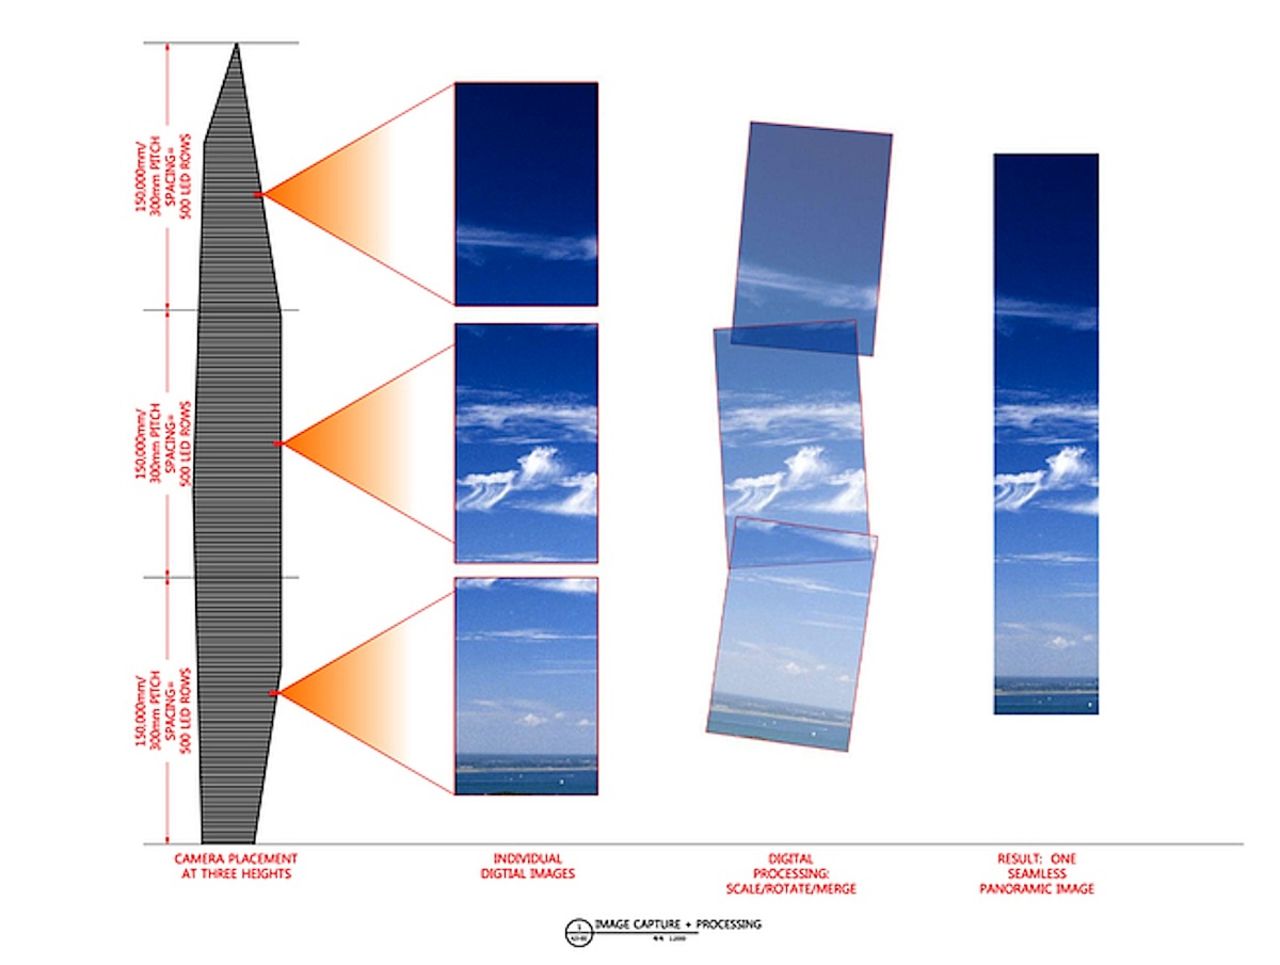 A graphic by GDS Architects explains how they'll pull off the Infinity Tower's "invisibility" illusion using cameras placed at three different heights to create a seamless panoramic image.   